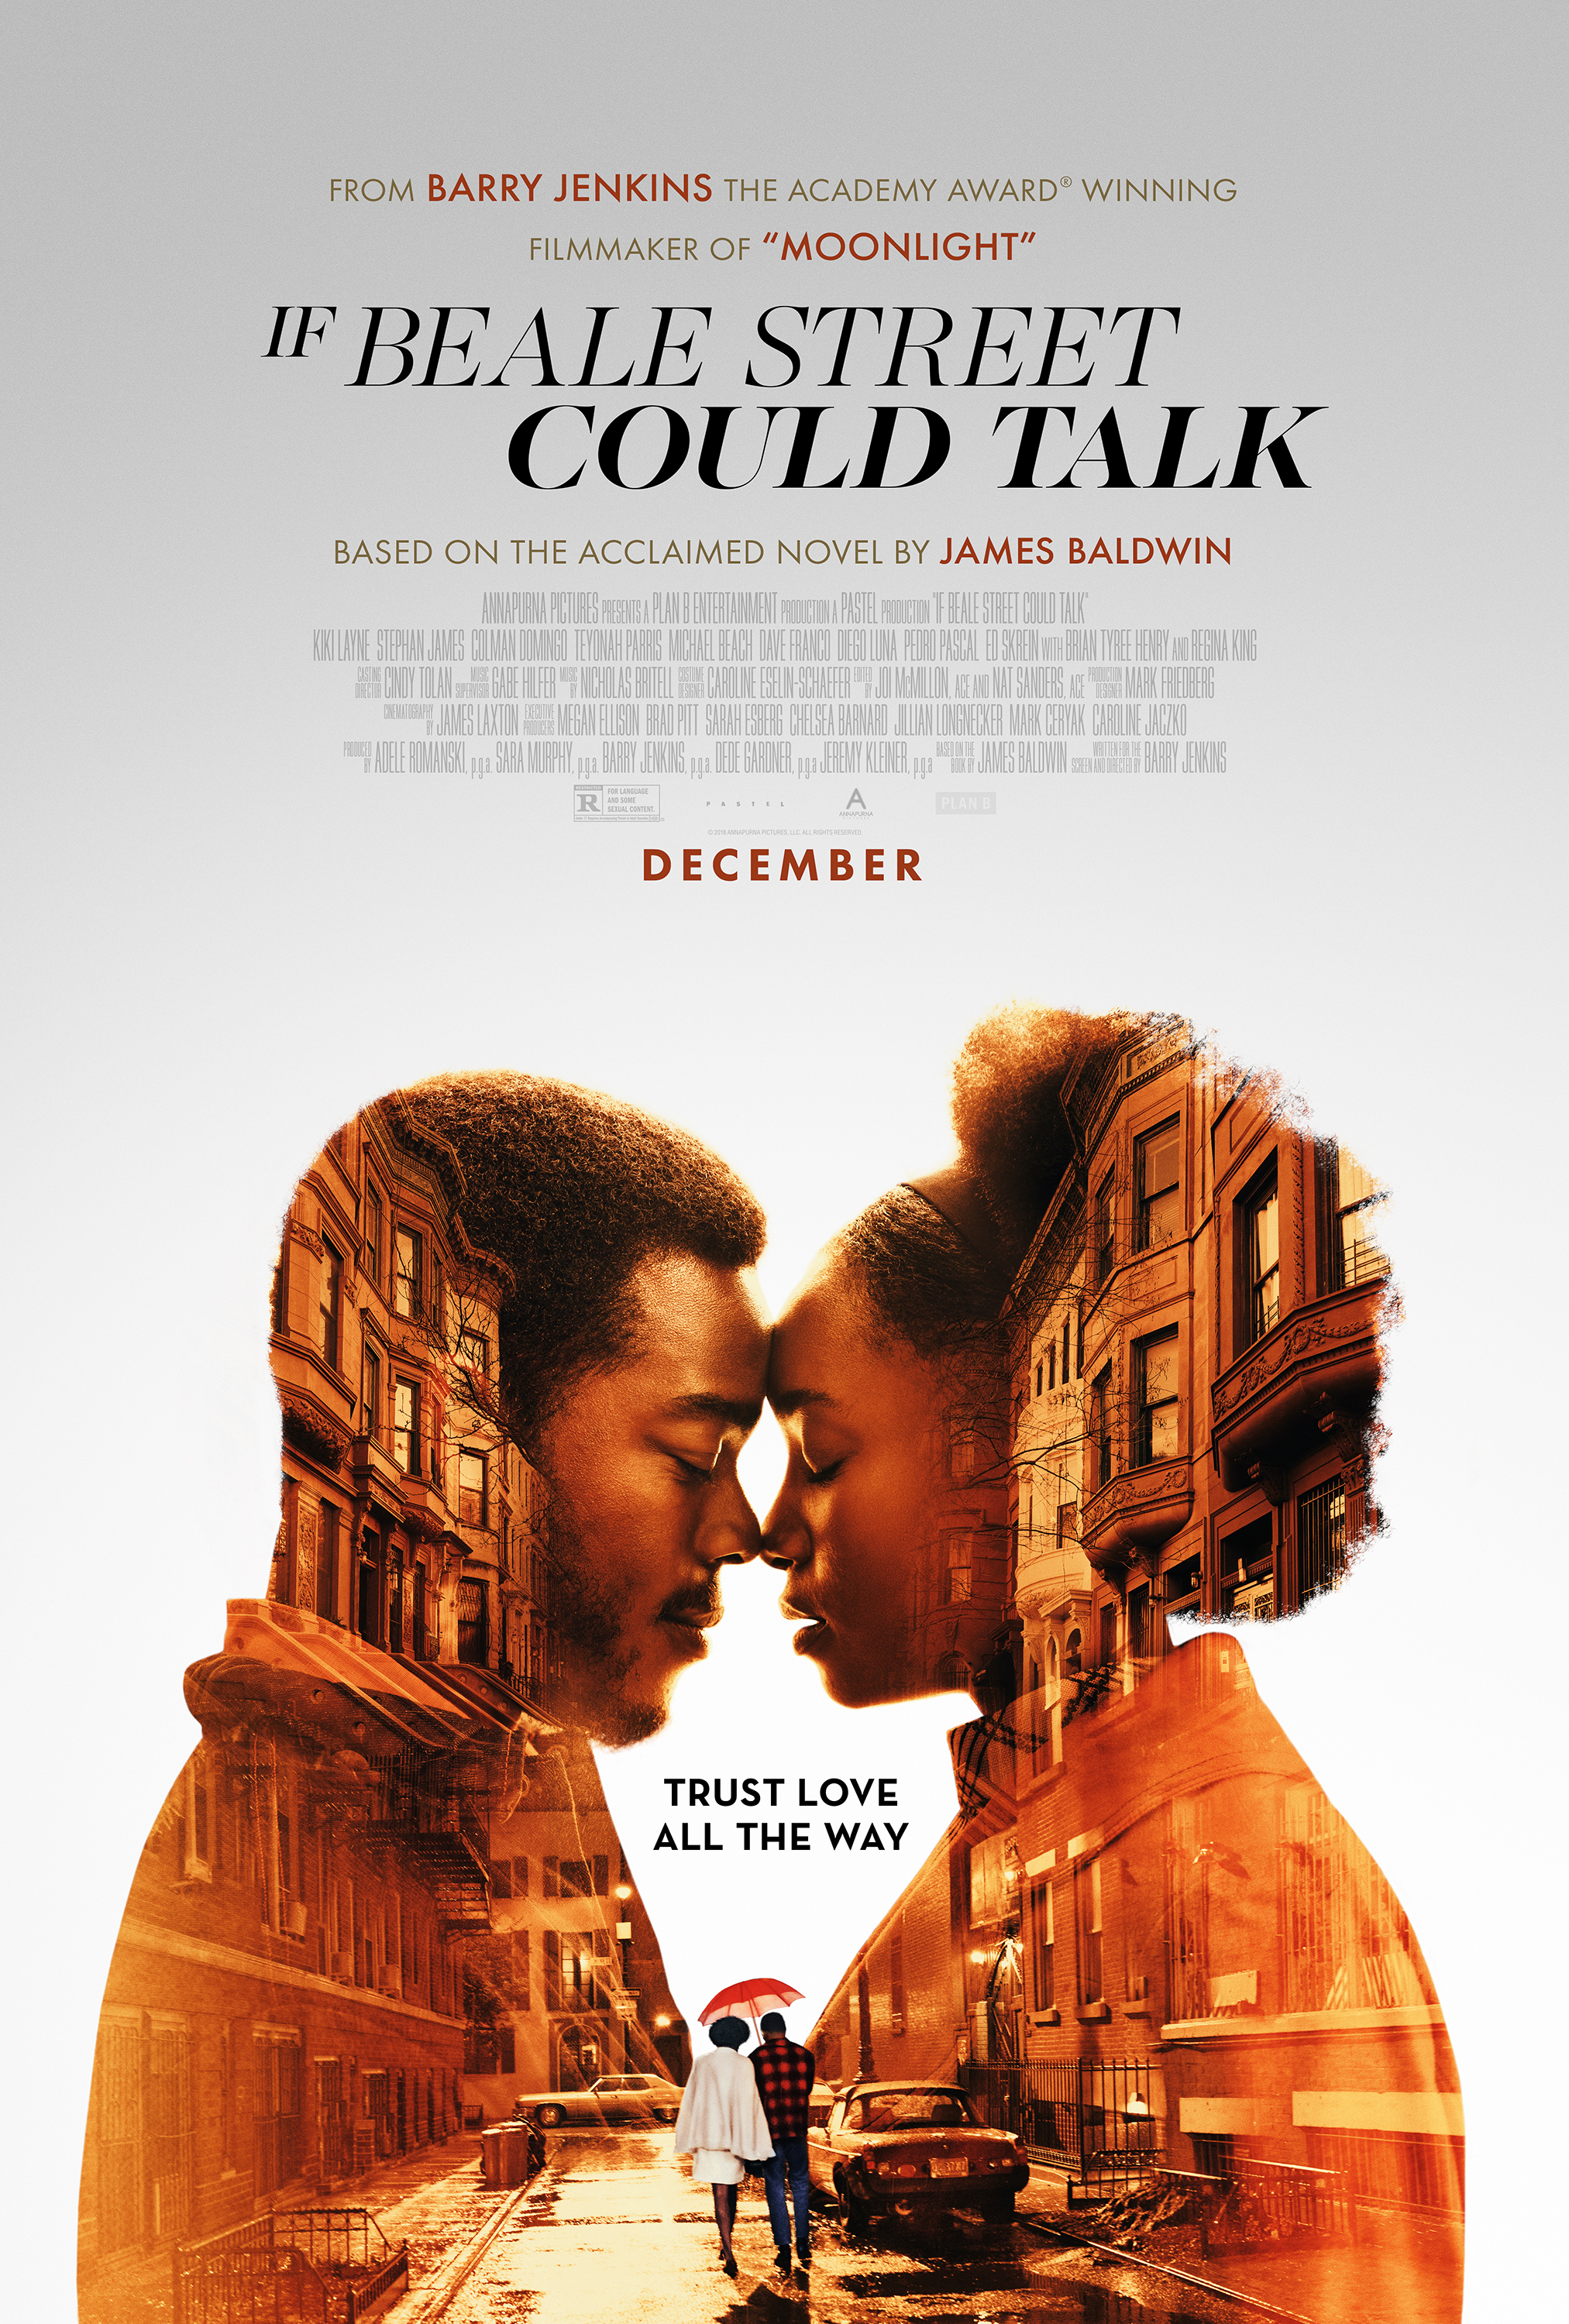 movie poster with man and woman in profile, embracing